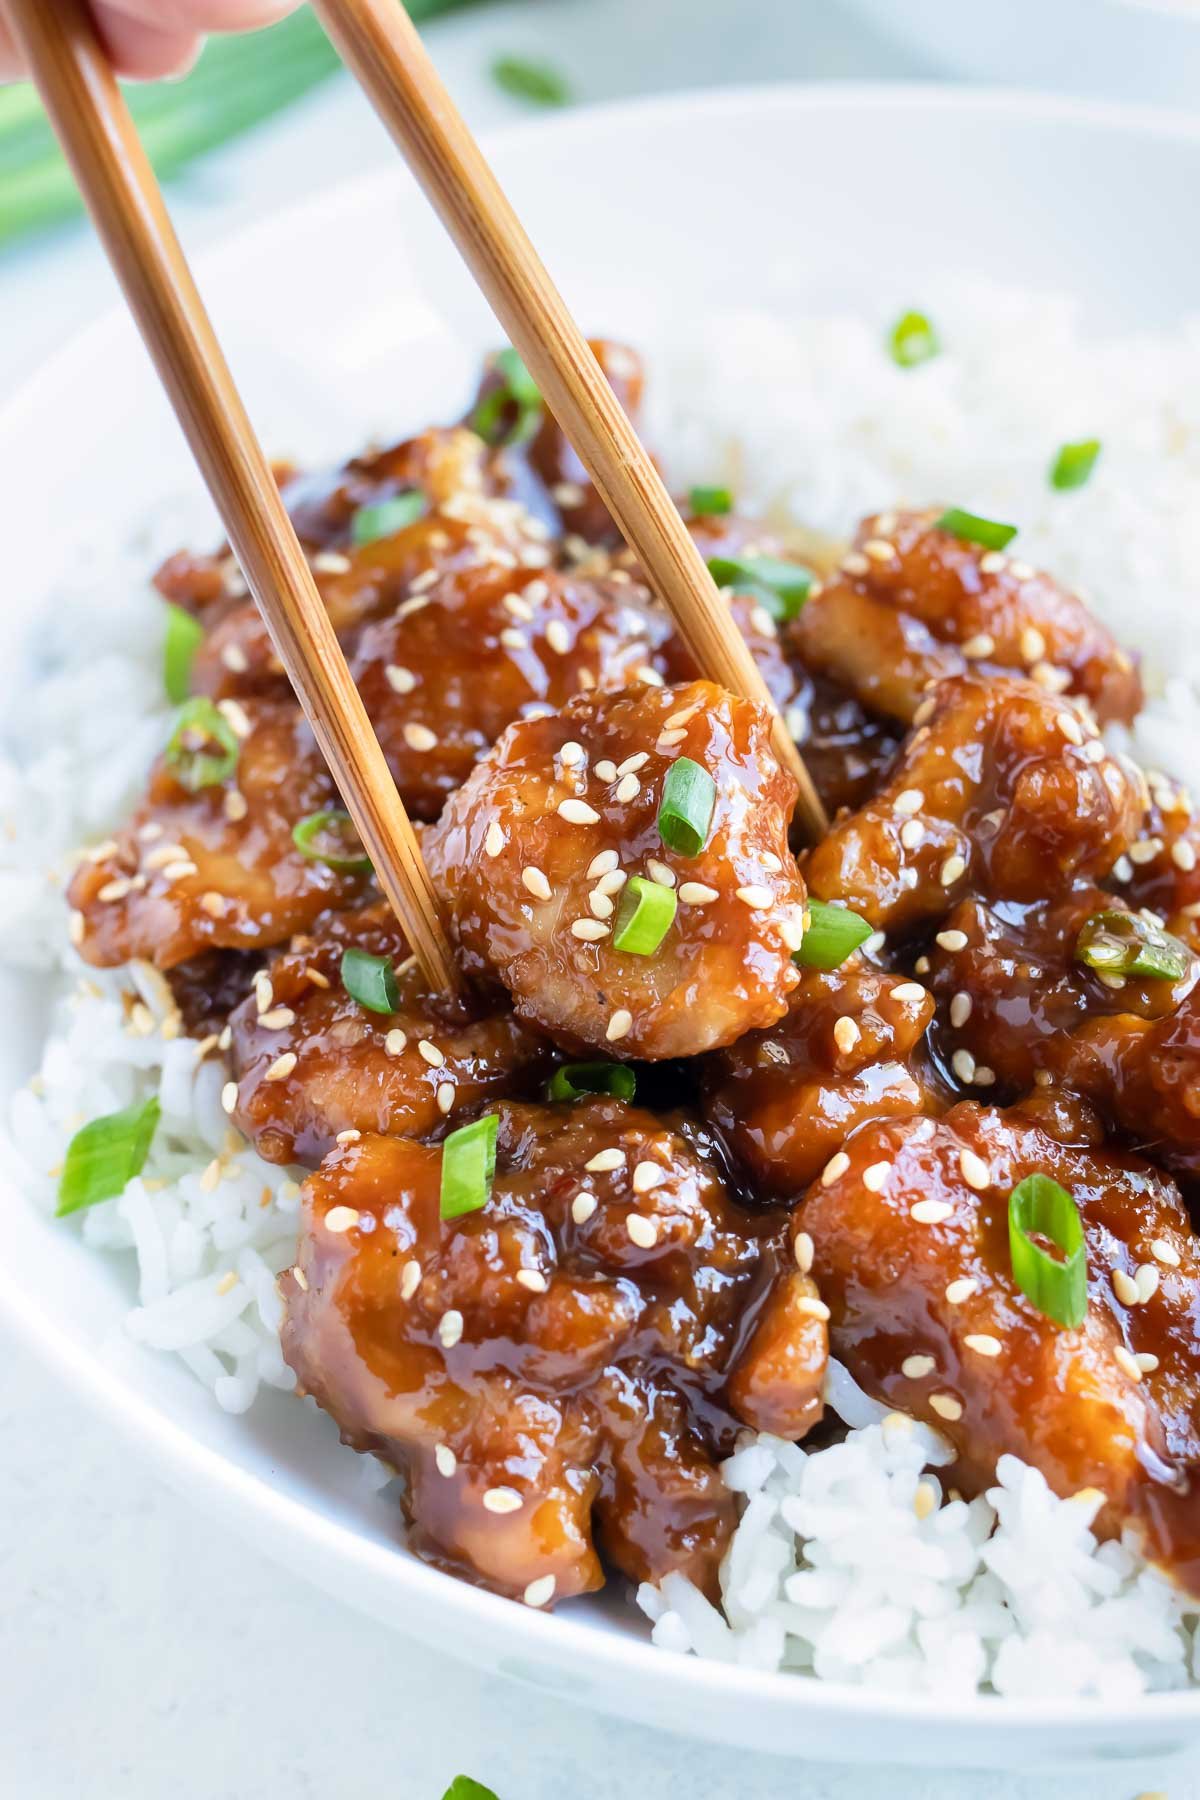 Chopsticks are used to lift up the sweet and sticky chicken.